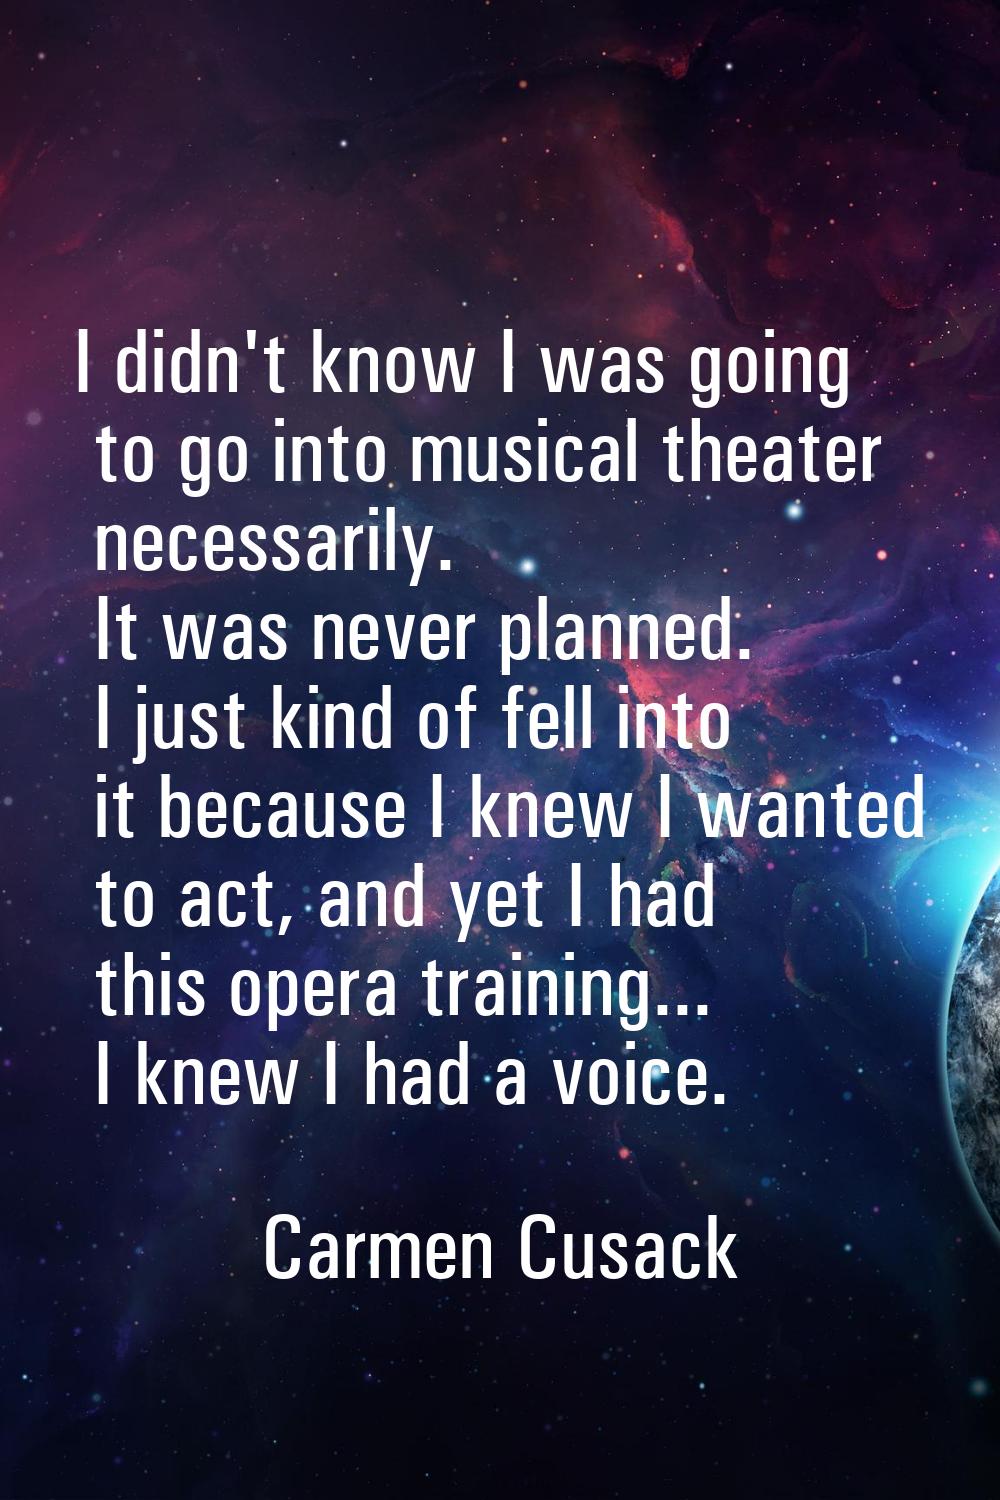 I didn't know I was going to go into musical theater necessarily. It was never planned. I just kind